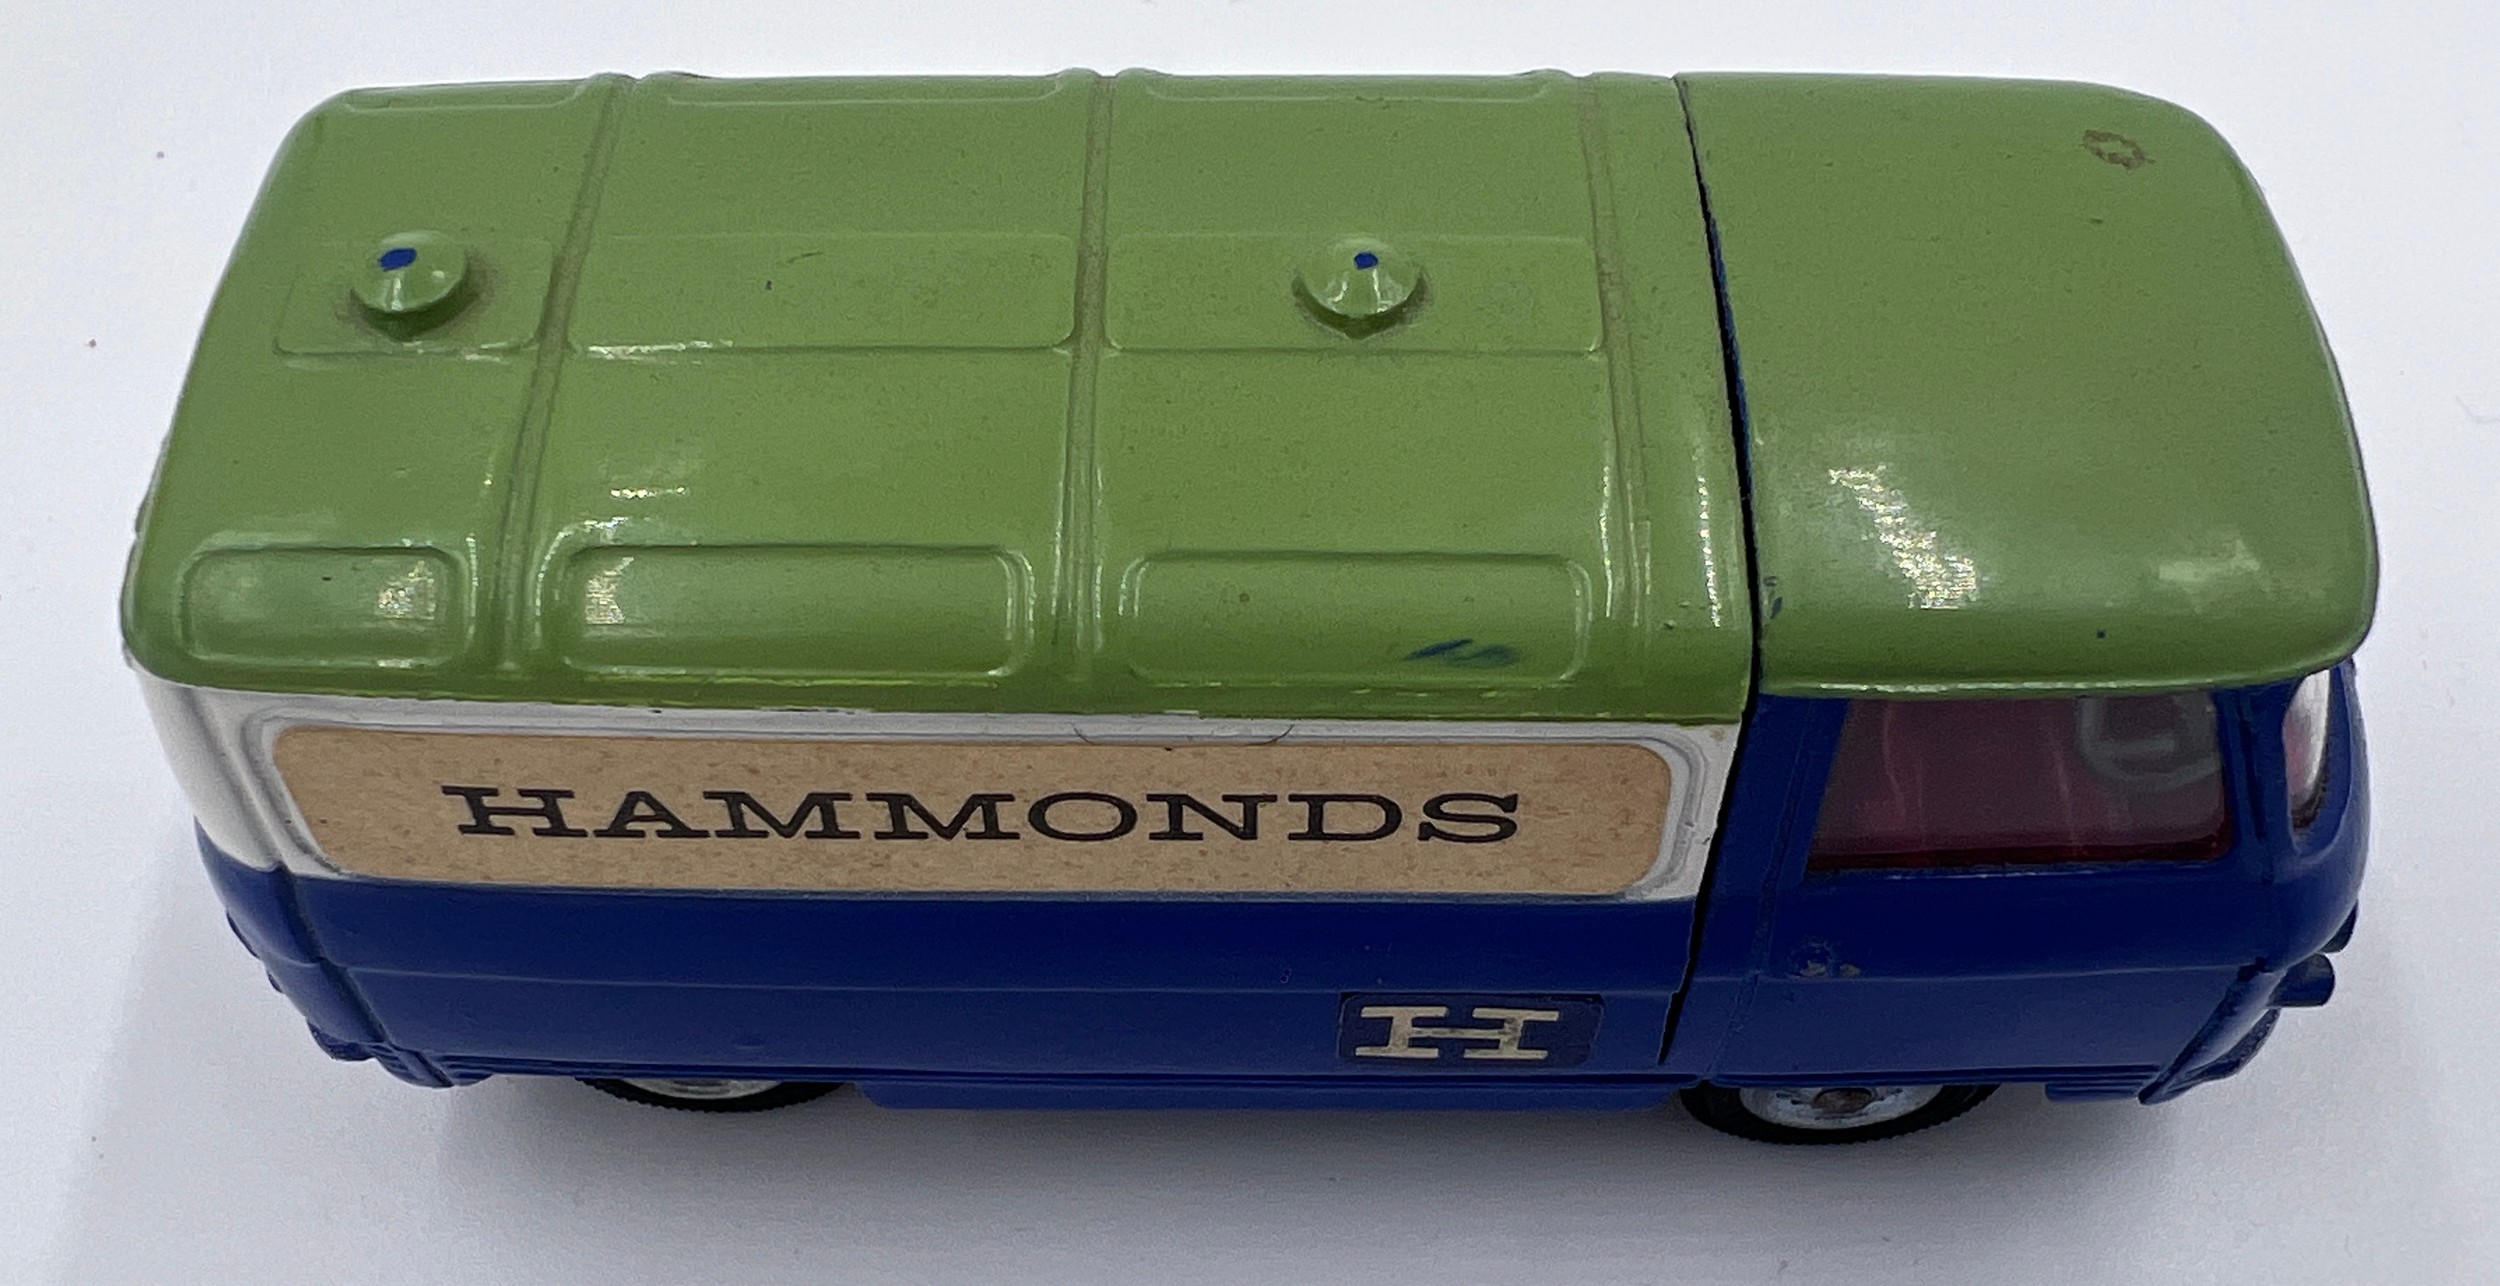 Corgi 462 Commer "Hammonds" Promotional Van in original box - finished in blue with a green roof, - Bild 6 aus 10